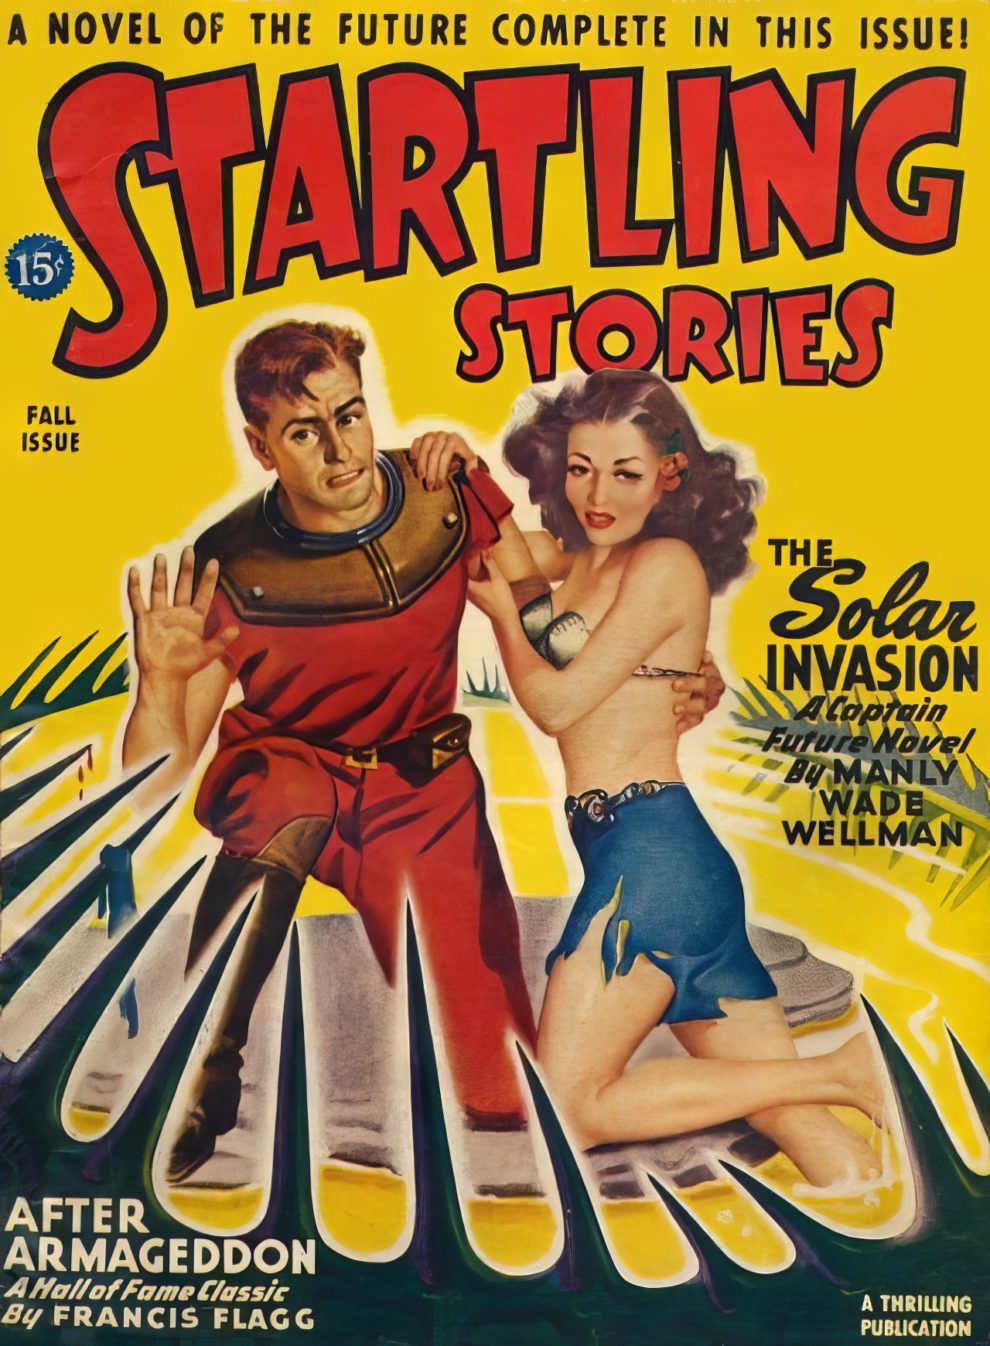 Startling Stories Covers 1940s 29 